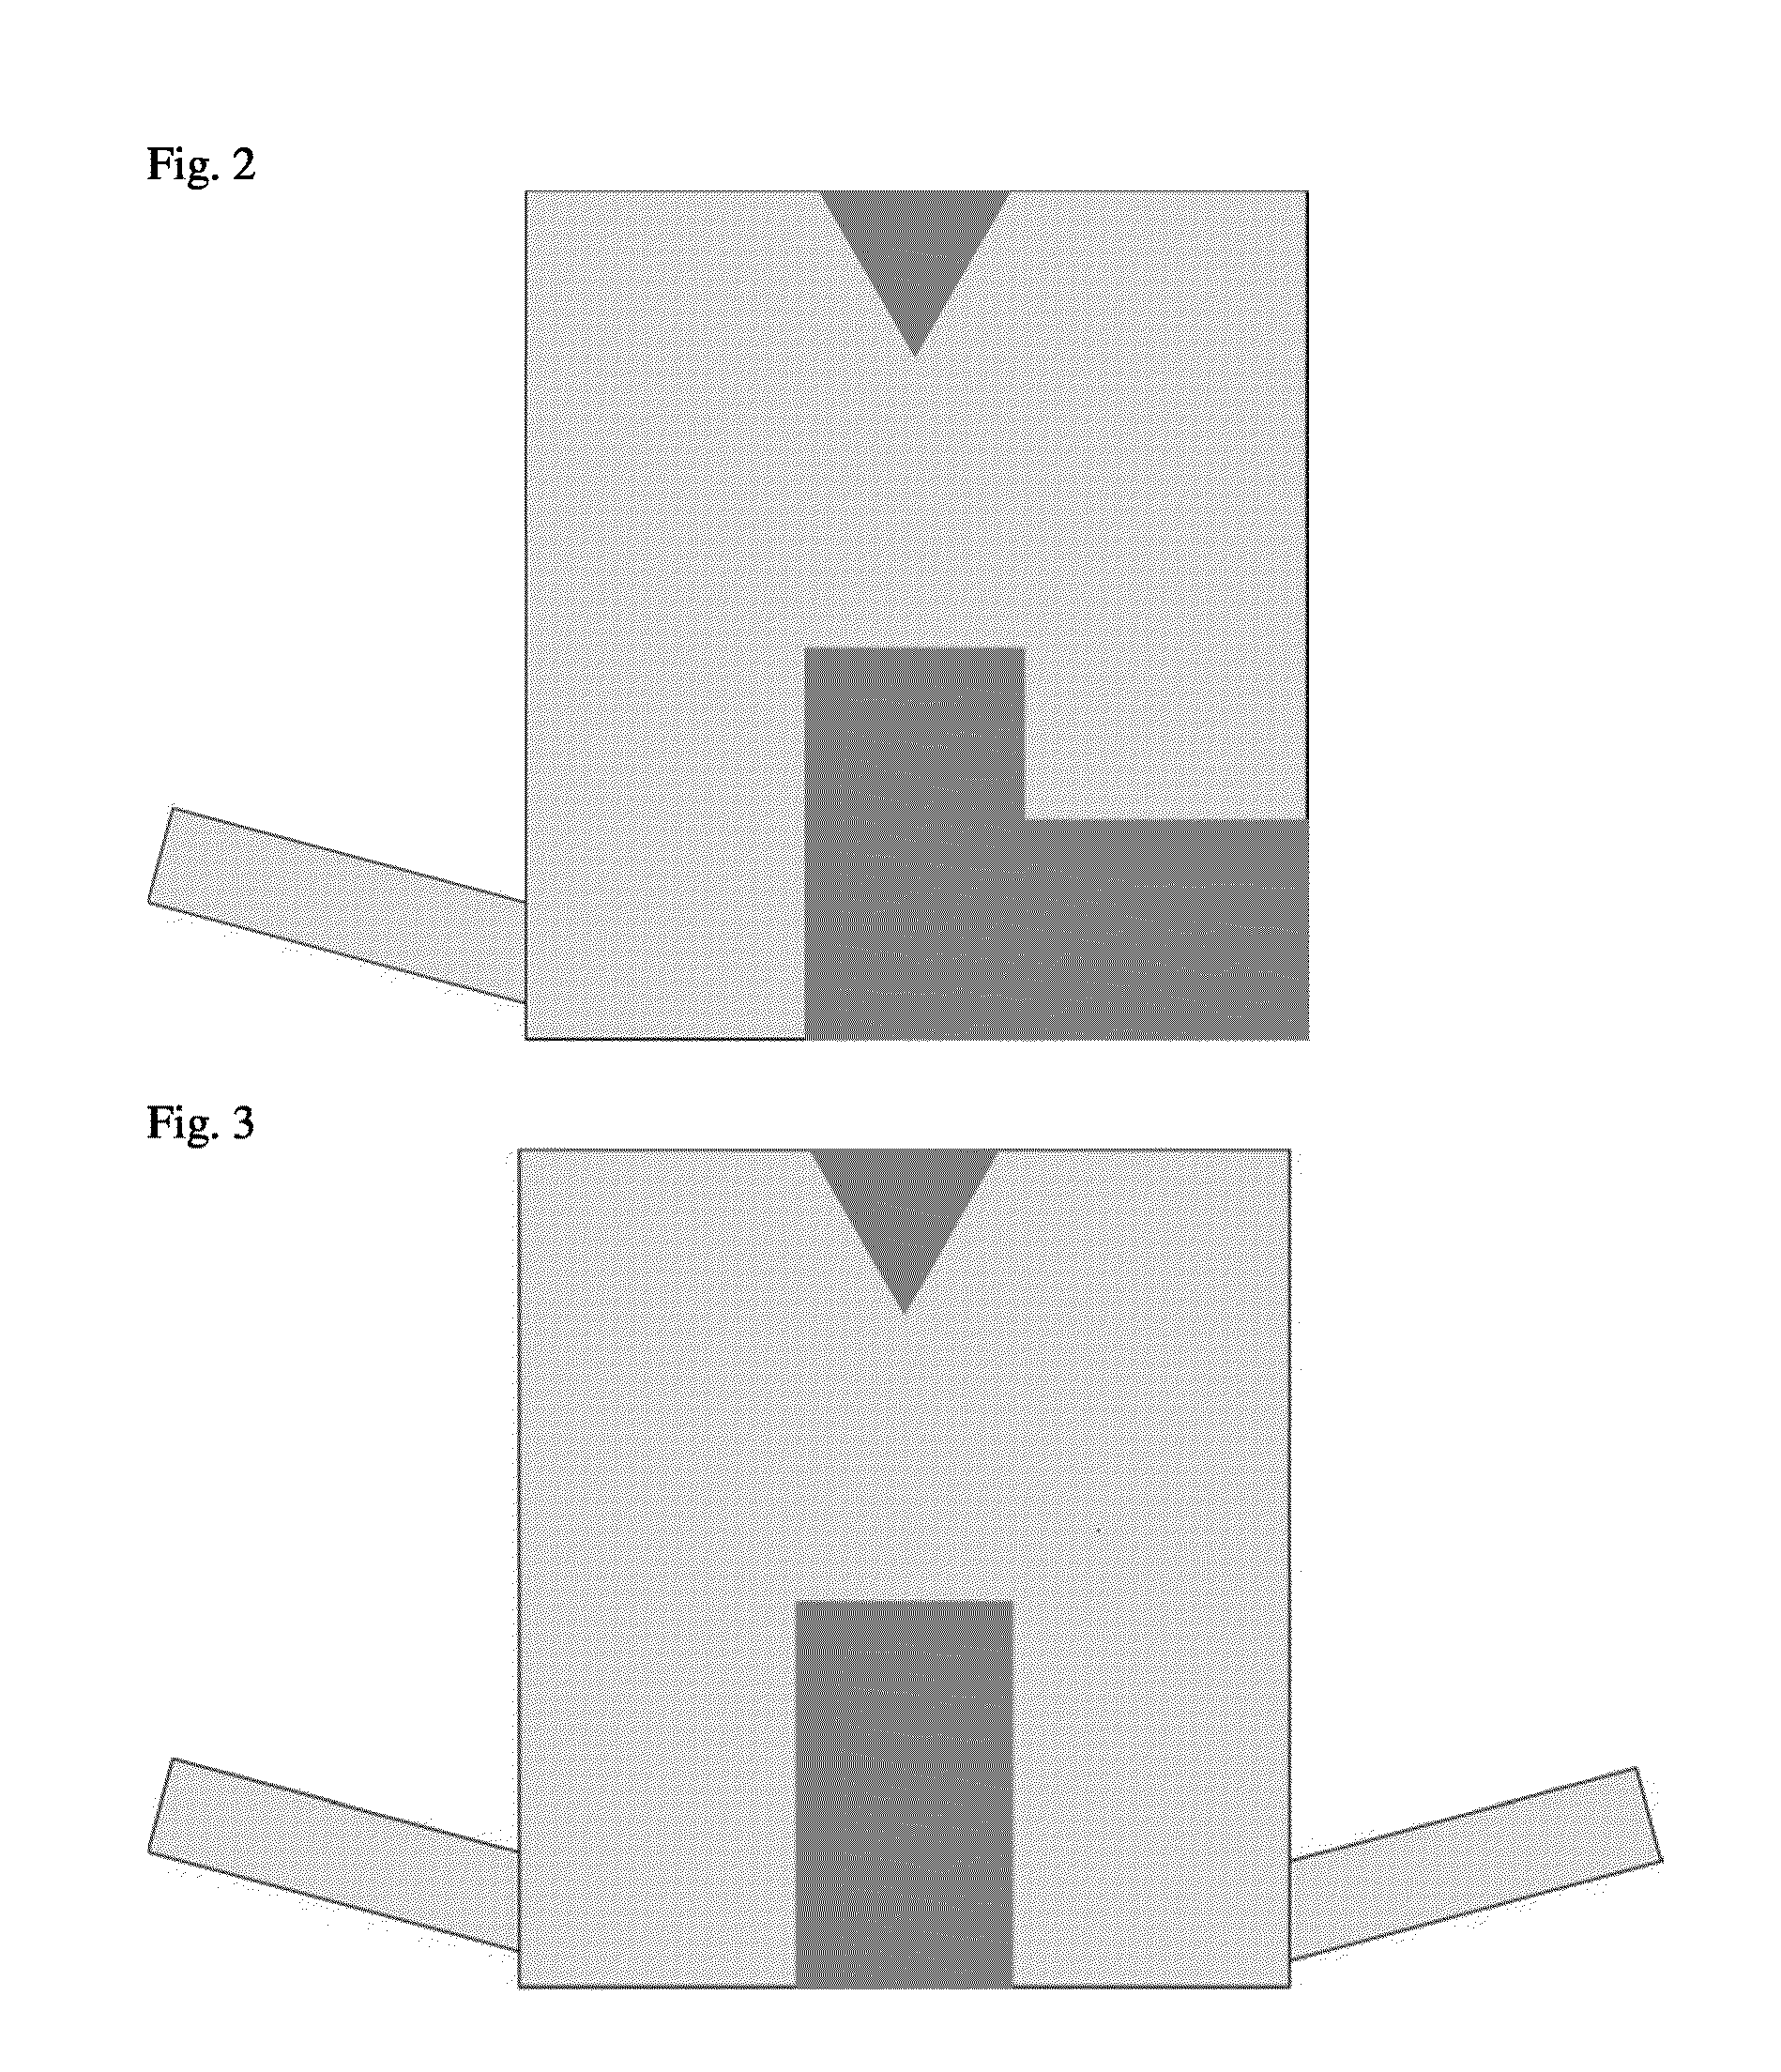 Spray dryer absorption apparatus with flat-bottomed chamber